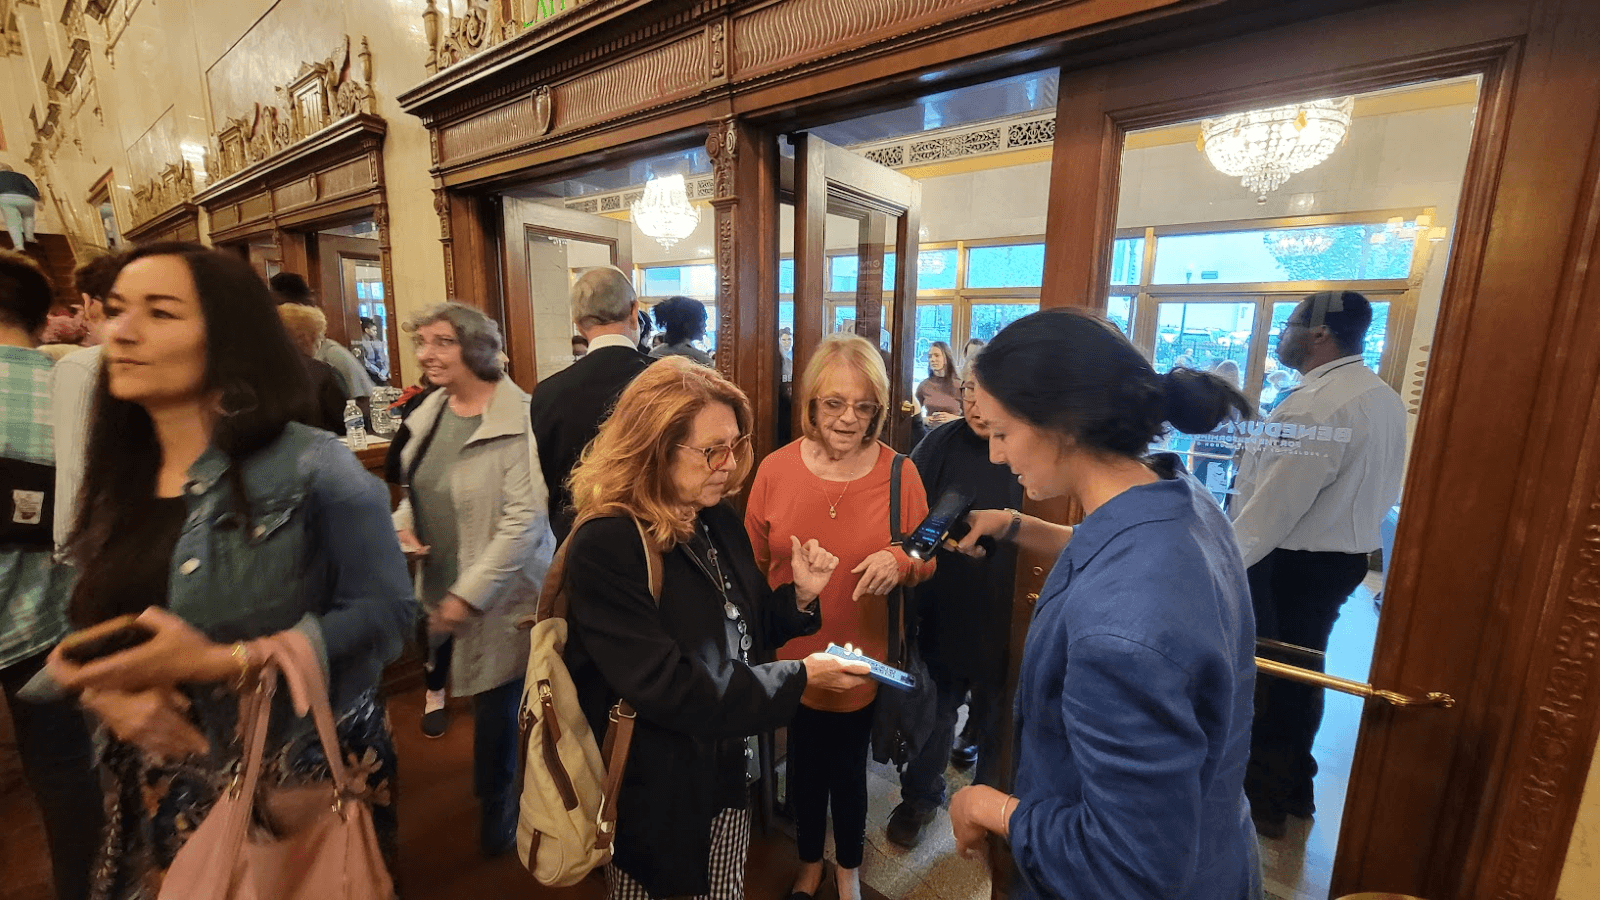 A woman in a blue jacket scans tickets as a group of patrons file in through the Benedum Center doors.